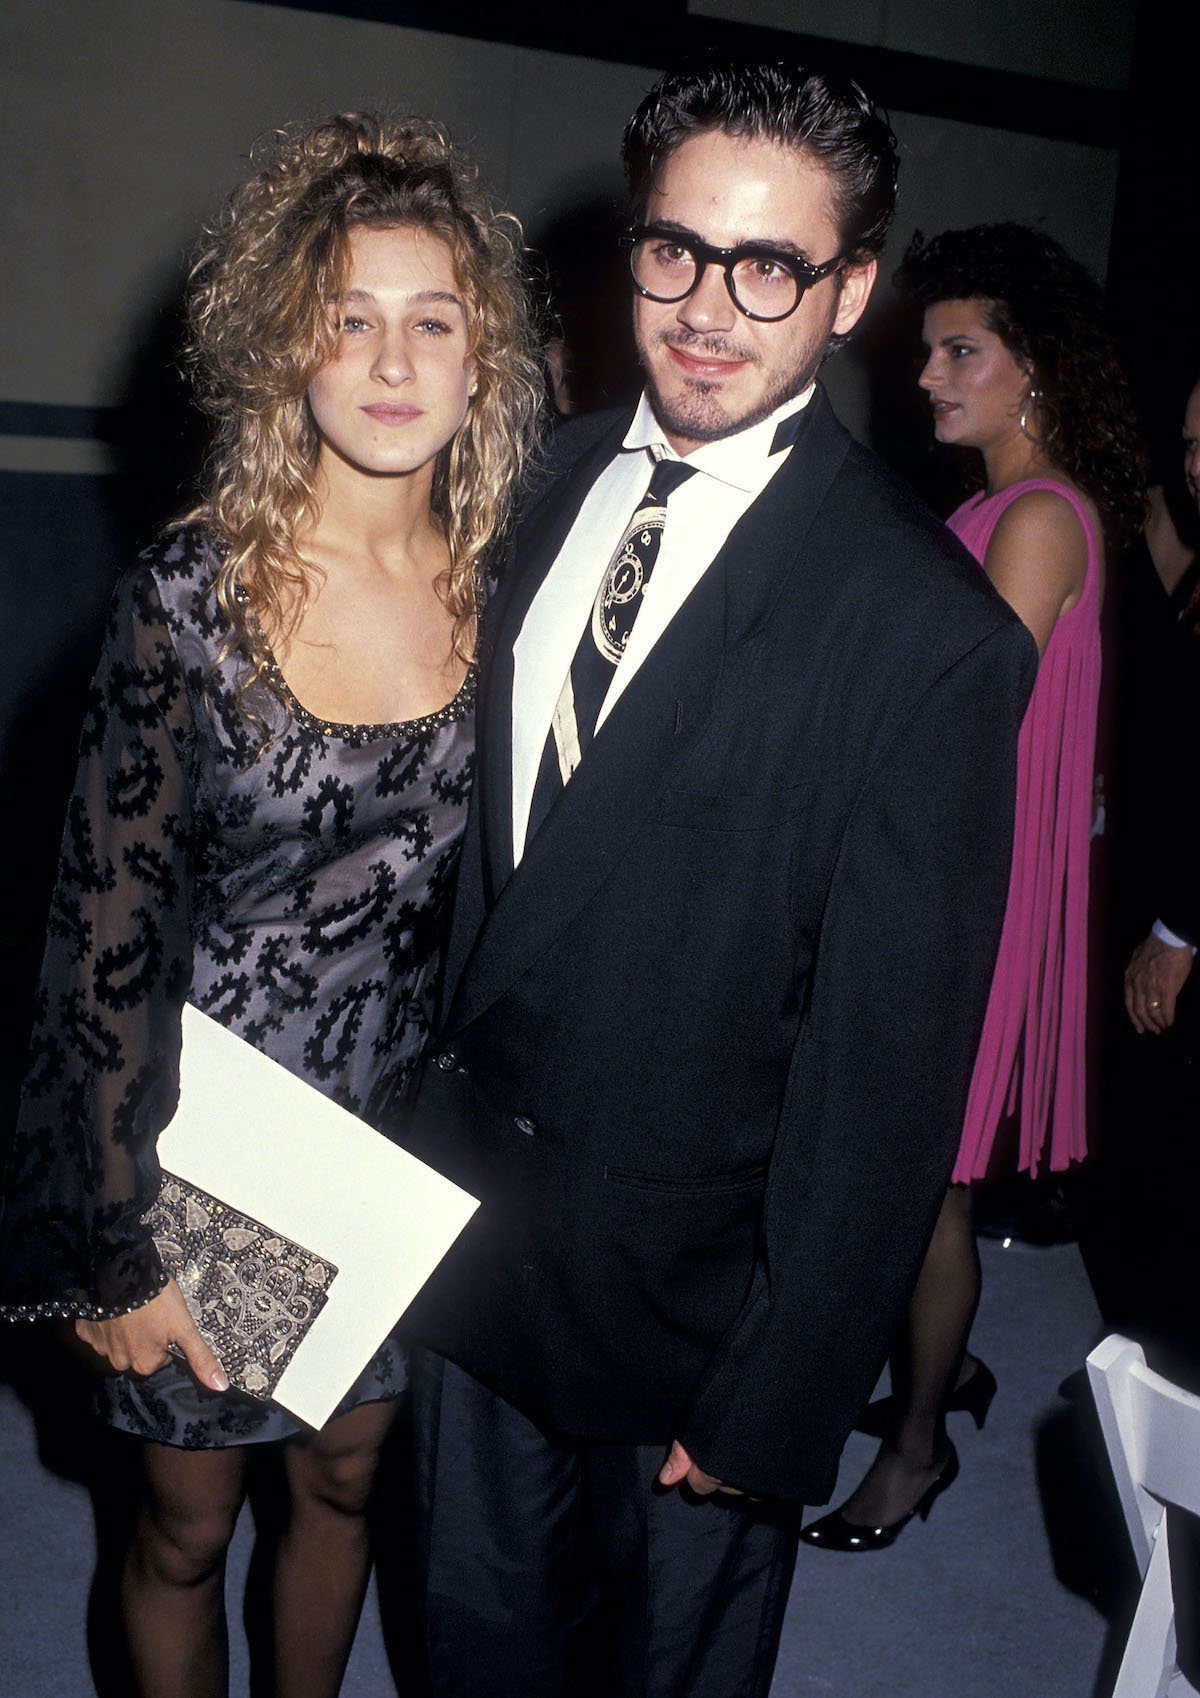 Sarah Jessica Parker Stayed in a Relationship With Robert Downey Jr ...